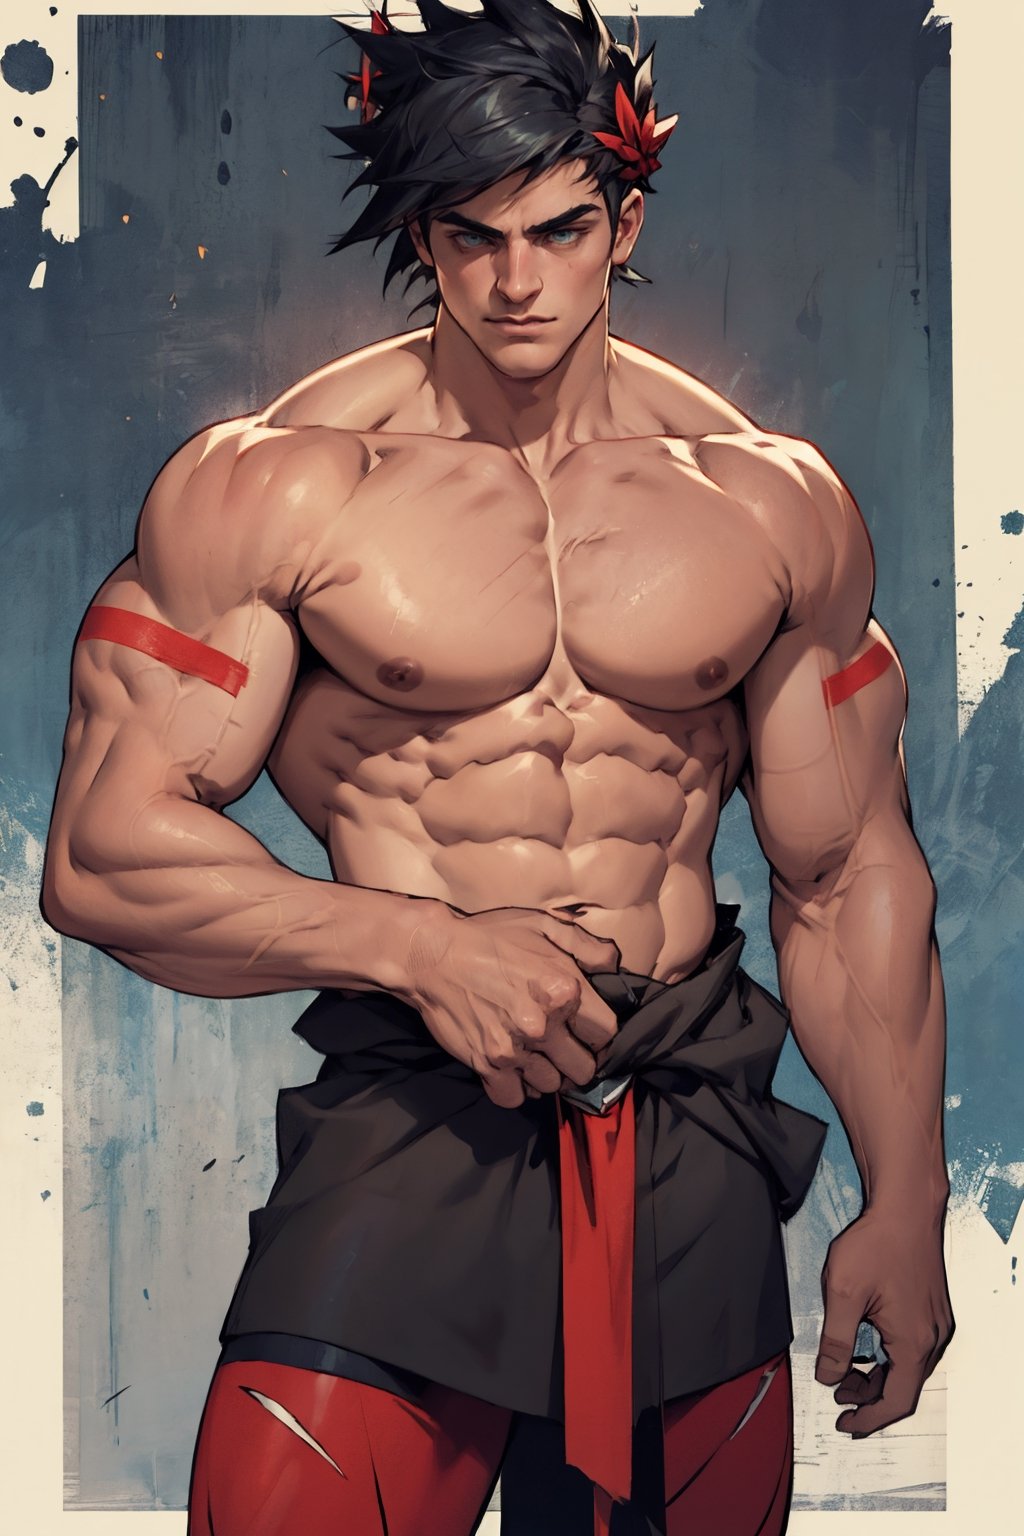 Zagreus with big muscles and veins